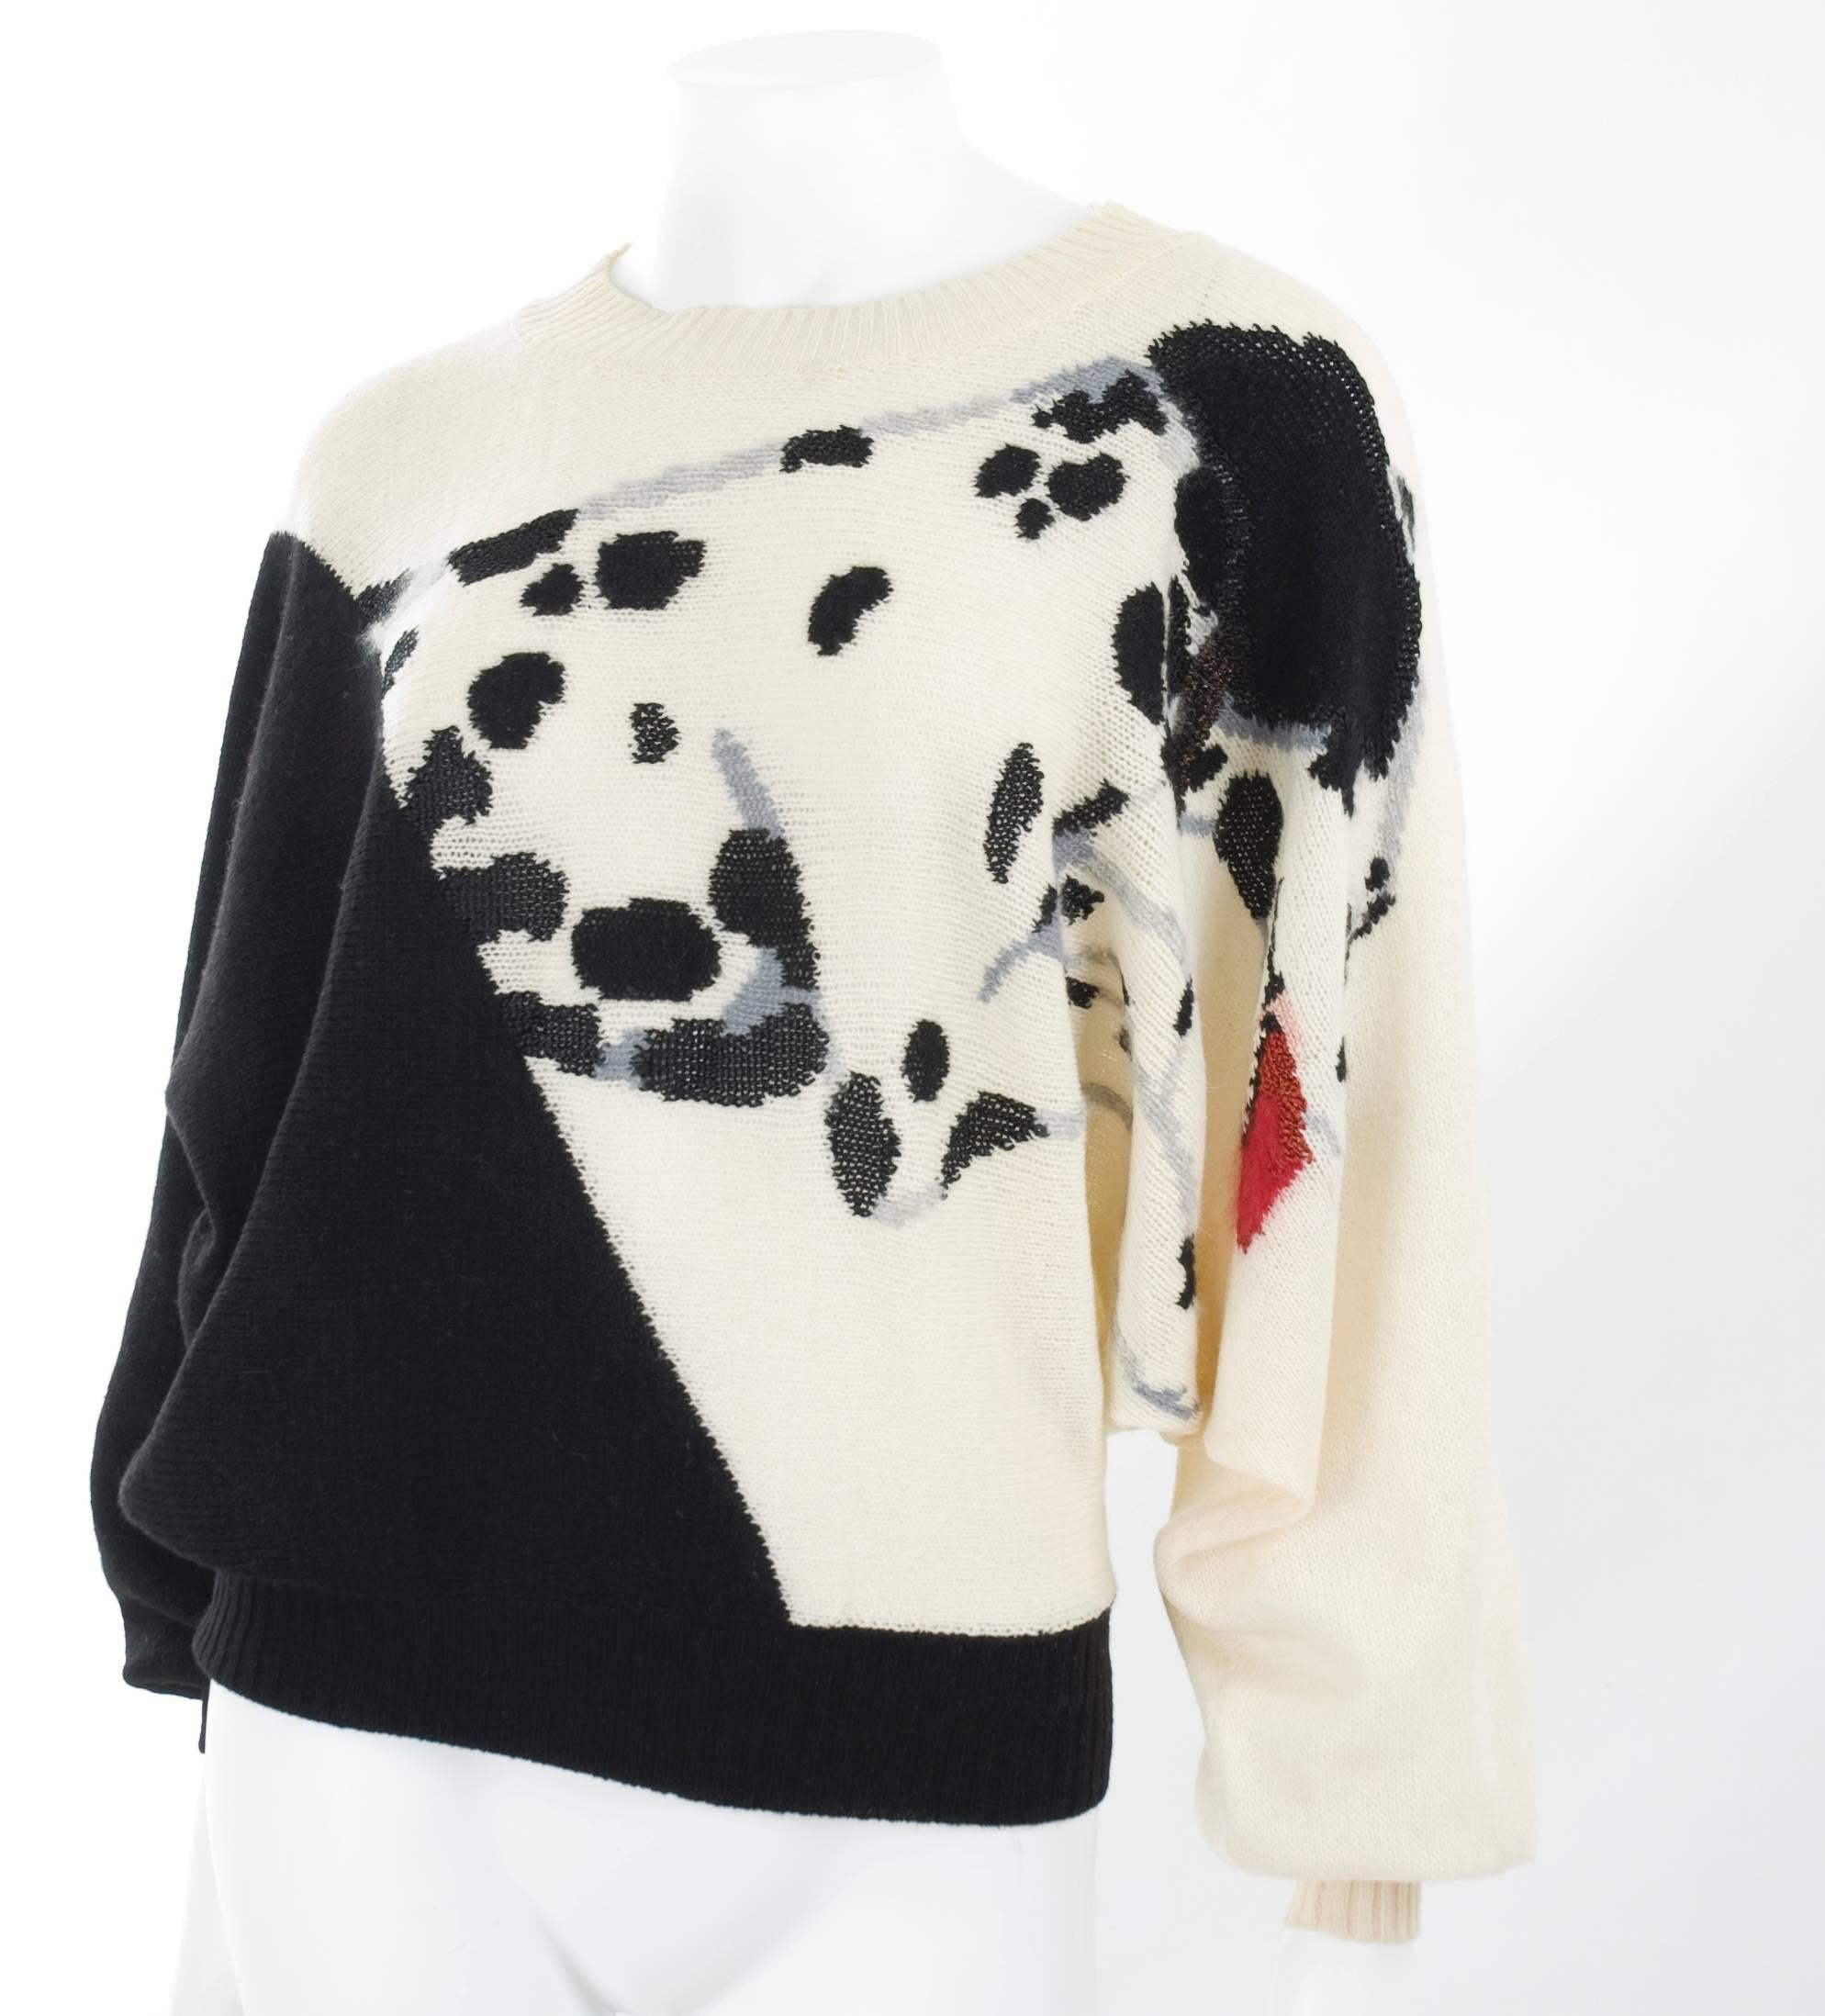 Krizia 1980s Black and Creme Dalmatian Sweater with batwing sleeves.
Krizia’s animal sweaters reached iconic status in the1980s.  
Super soft wool and angora mix. 
Excellent condition - no flaws to mention.
Size 46 Italy - about